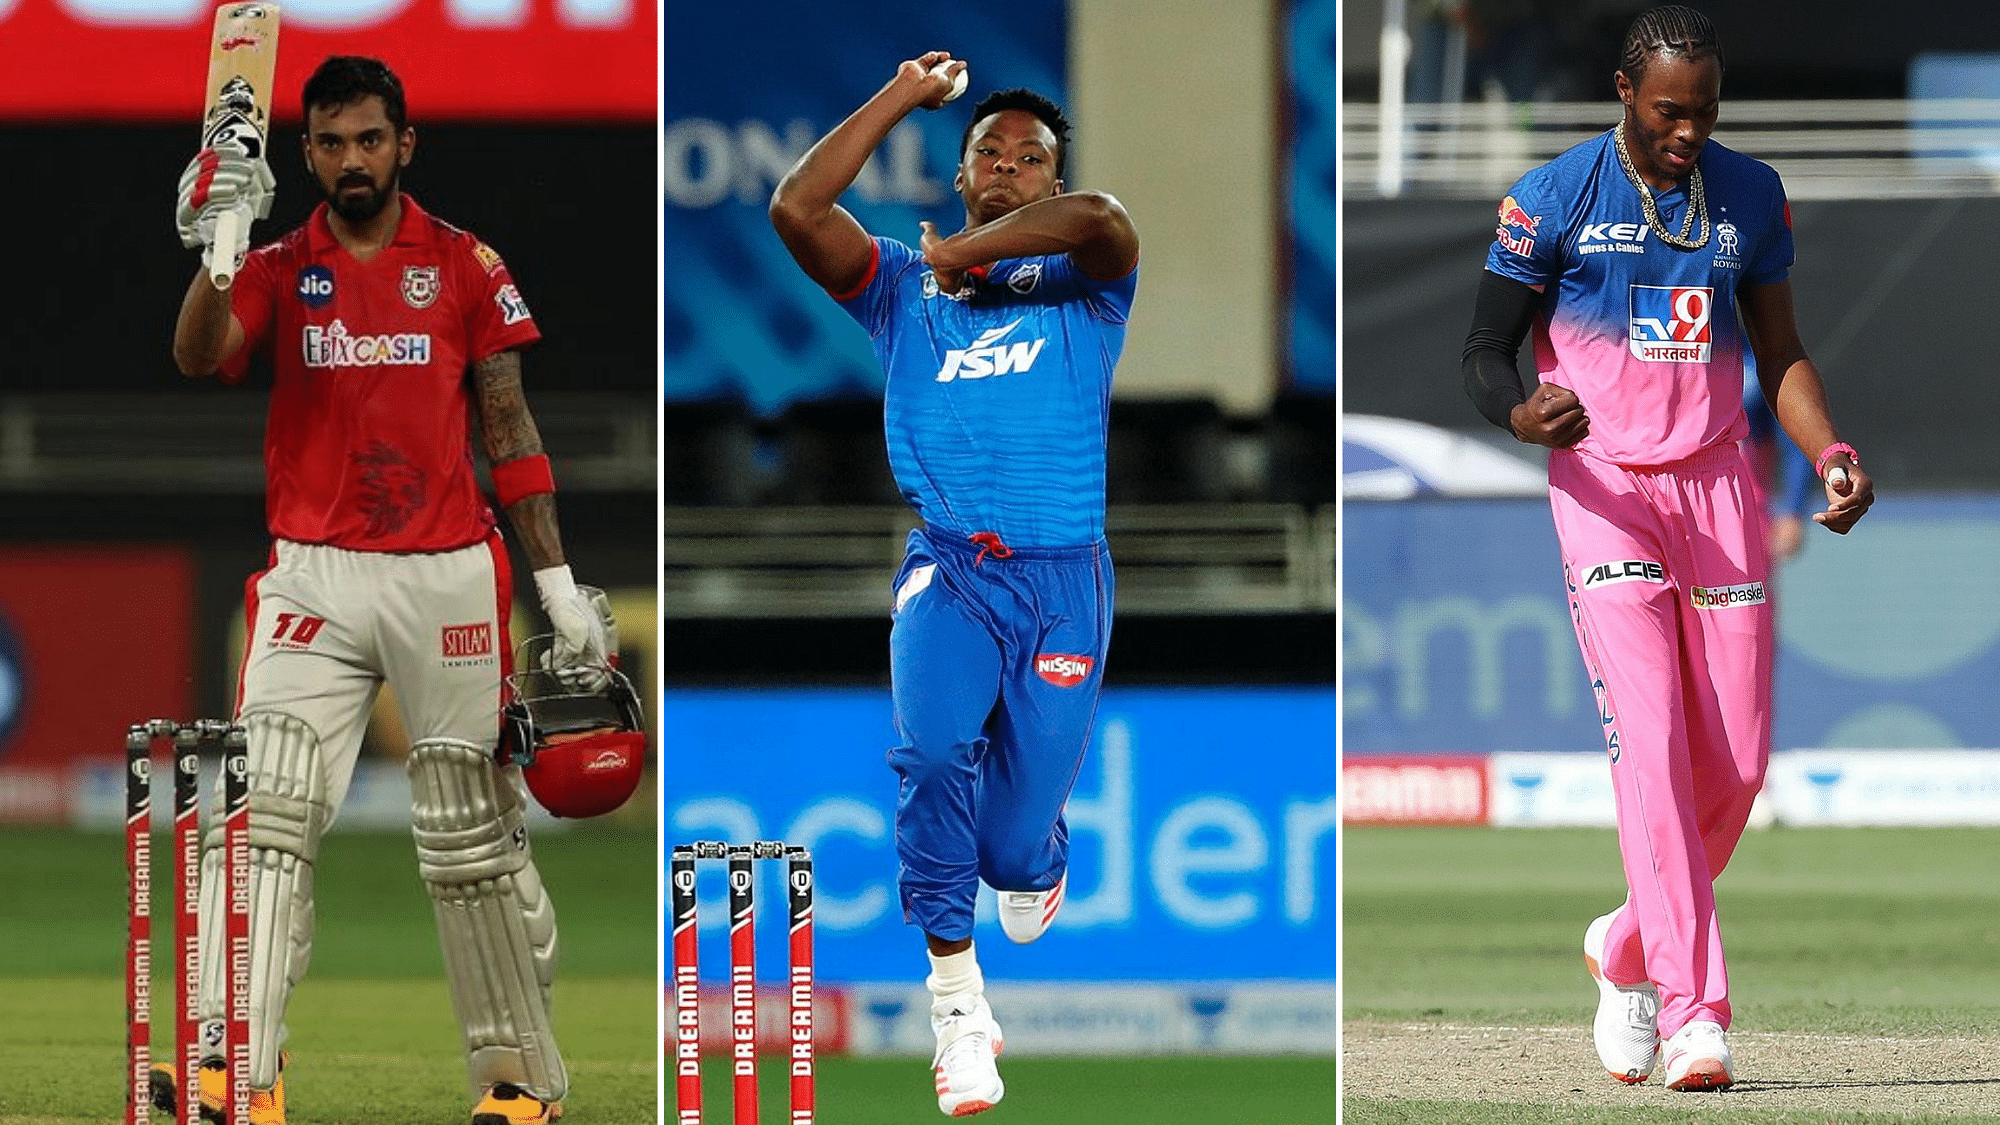 KL Rahul holds on to the Orange Cap with 448 runs, while Kagiso Rabada leads Purple Cap race with 18 wickets and Jofra Archer tops MVP table with 194.5 points